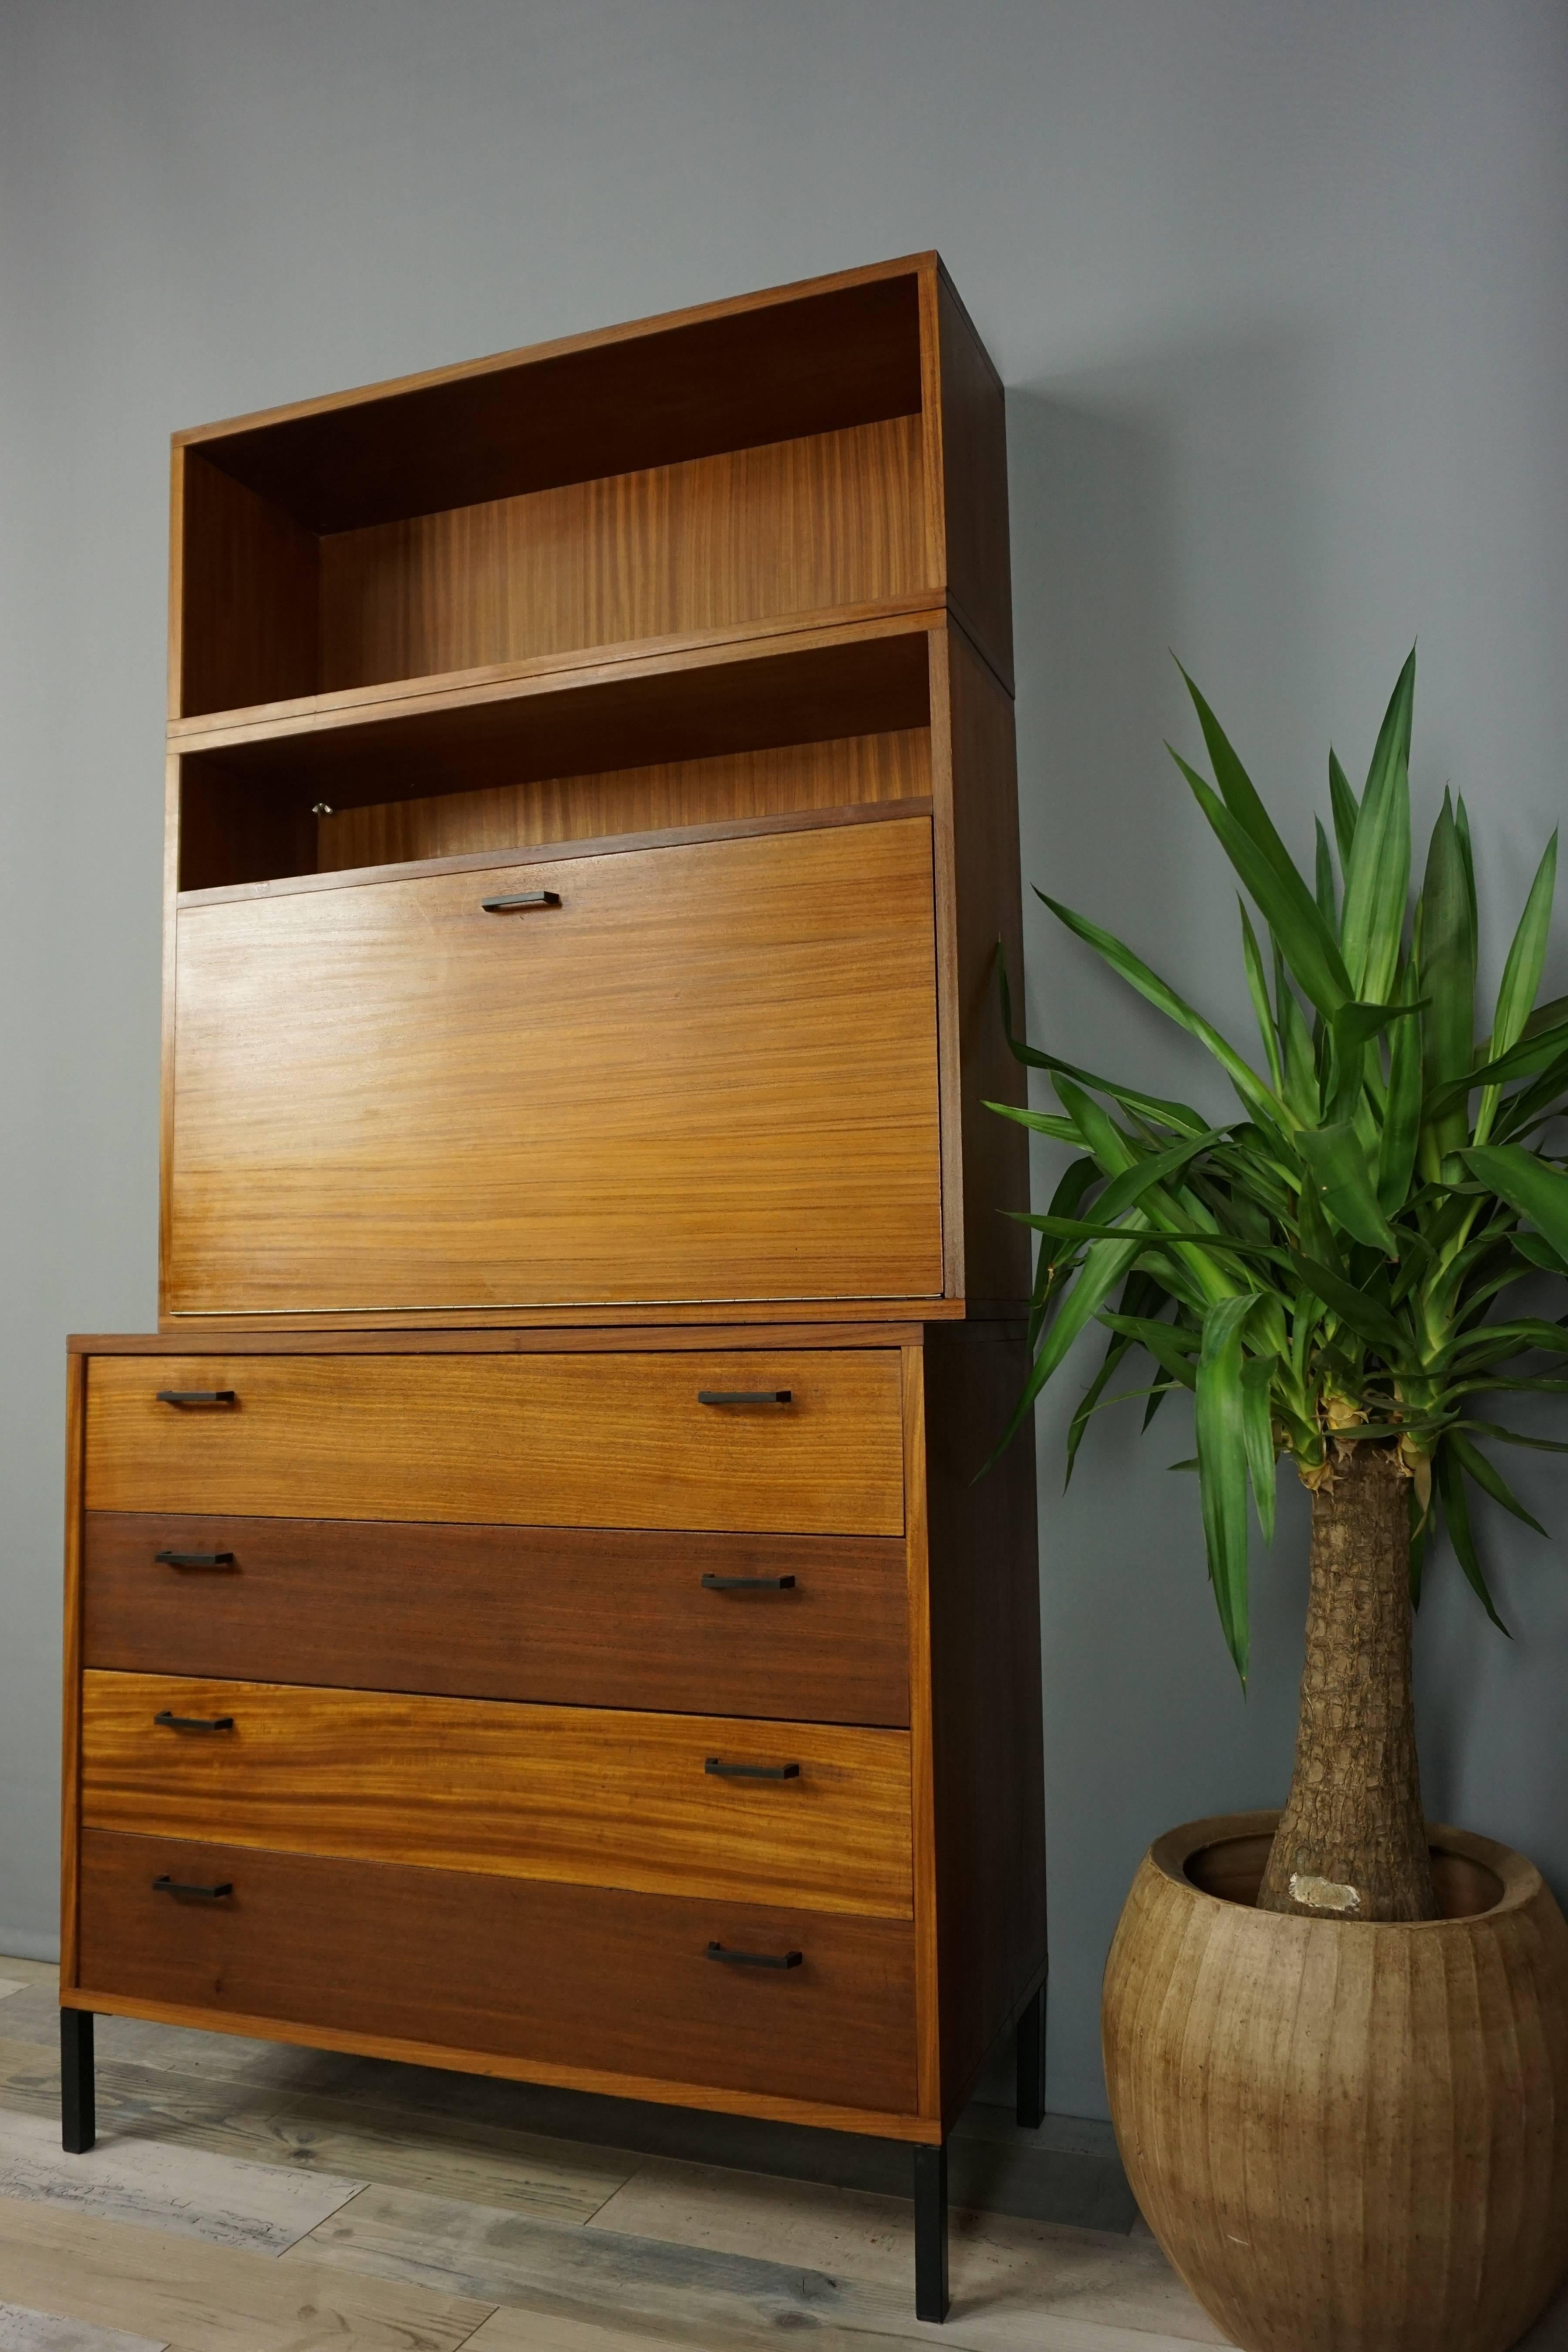 20th Century Wooden Teak Metal and Glass Modular Wall Unit From the 1950s